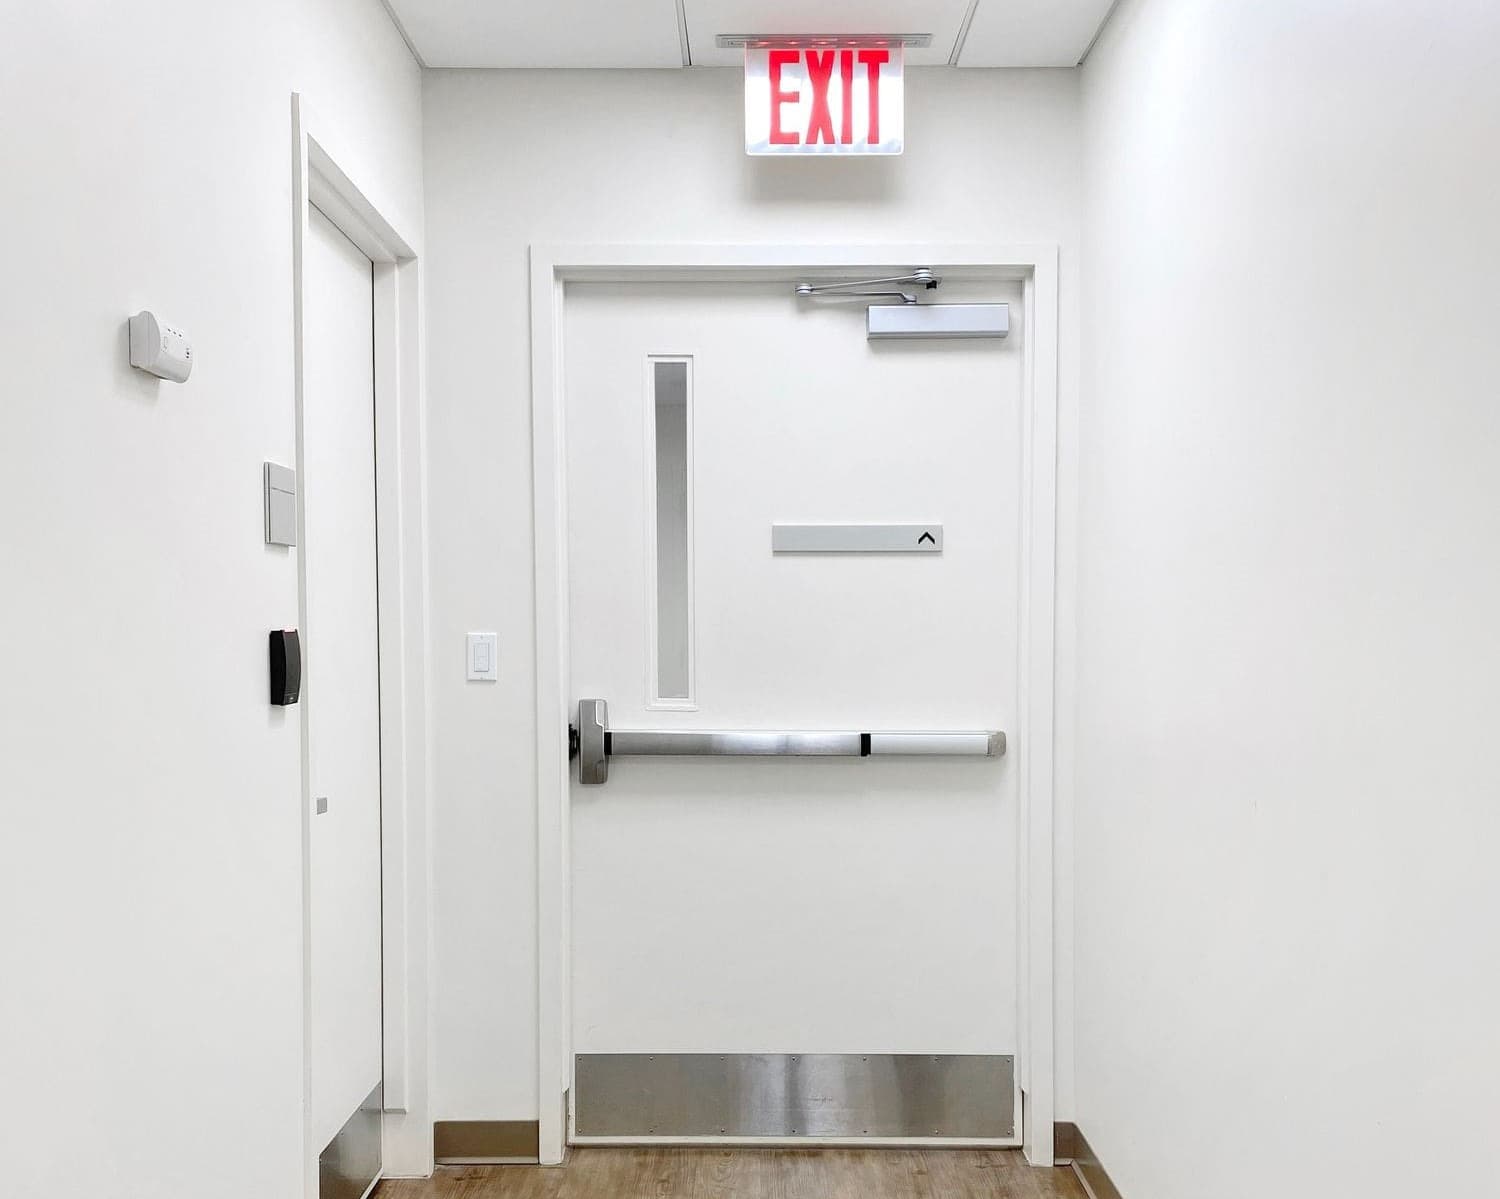 hospital corridor to emergency exit pedestrian man door with exit sign and pushbar